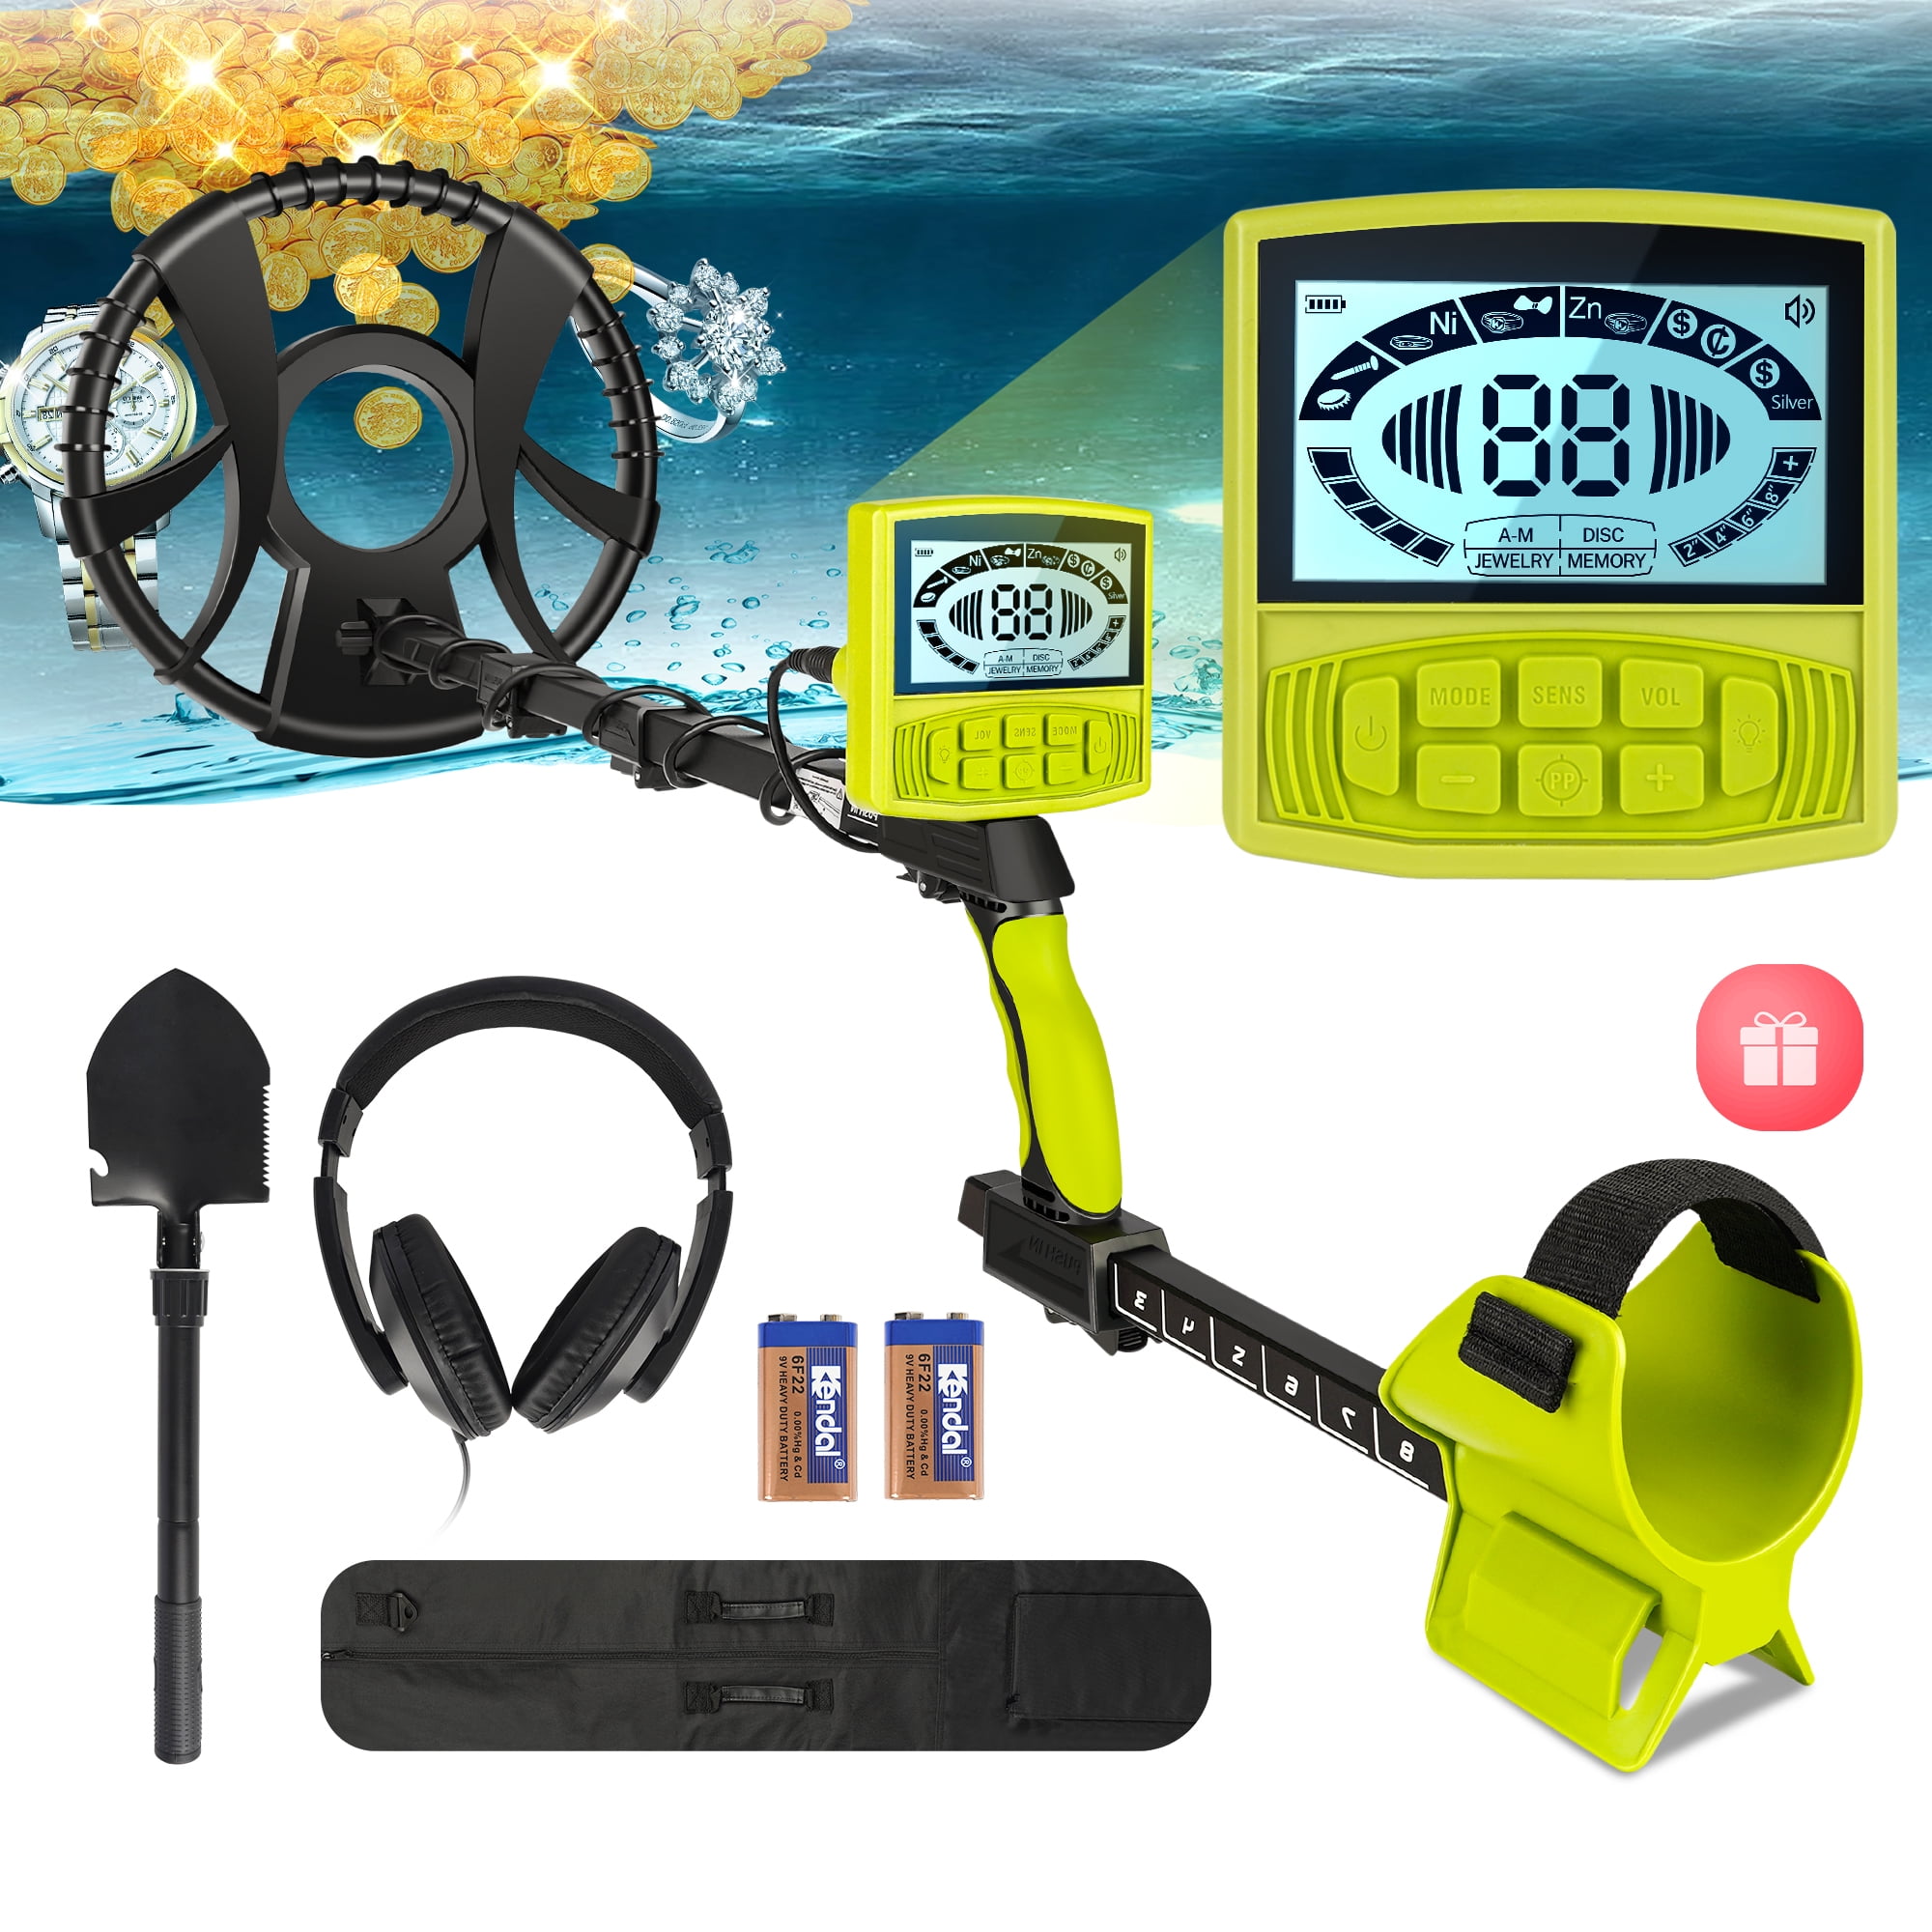 Metal Detector for Adults Kids Waterproof, BTMWAY Professional Higher  Accuracy Gold Detector - 5 Detection Modes | Bigger Backlit LCD Display |  New